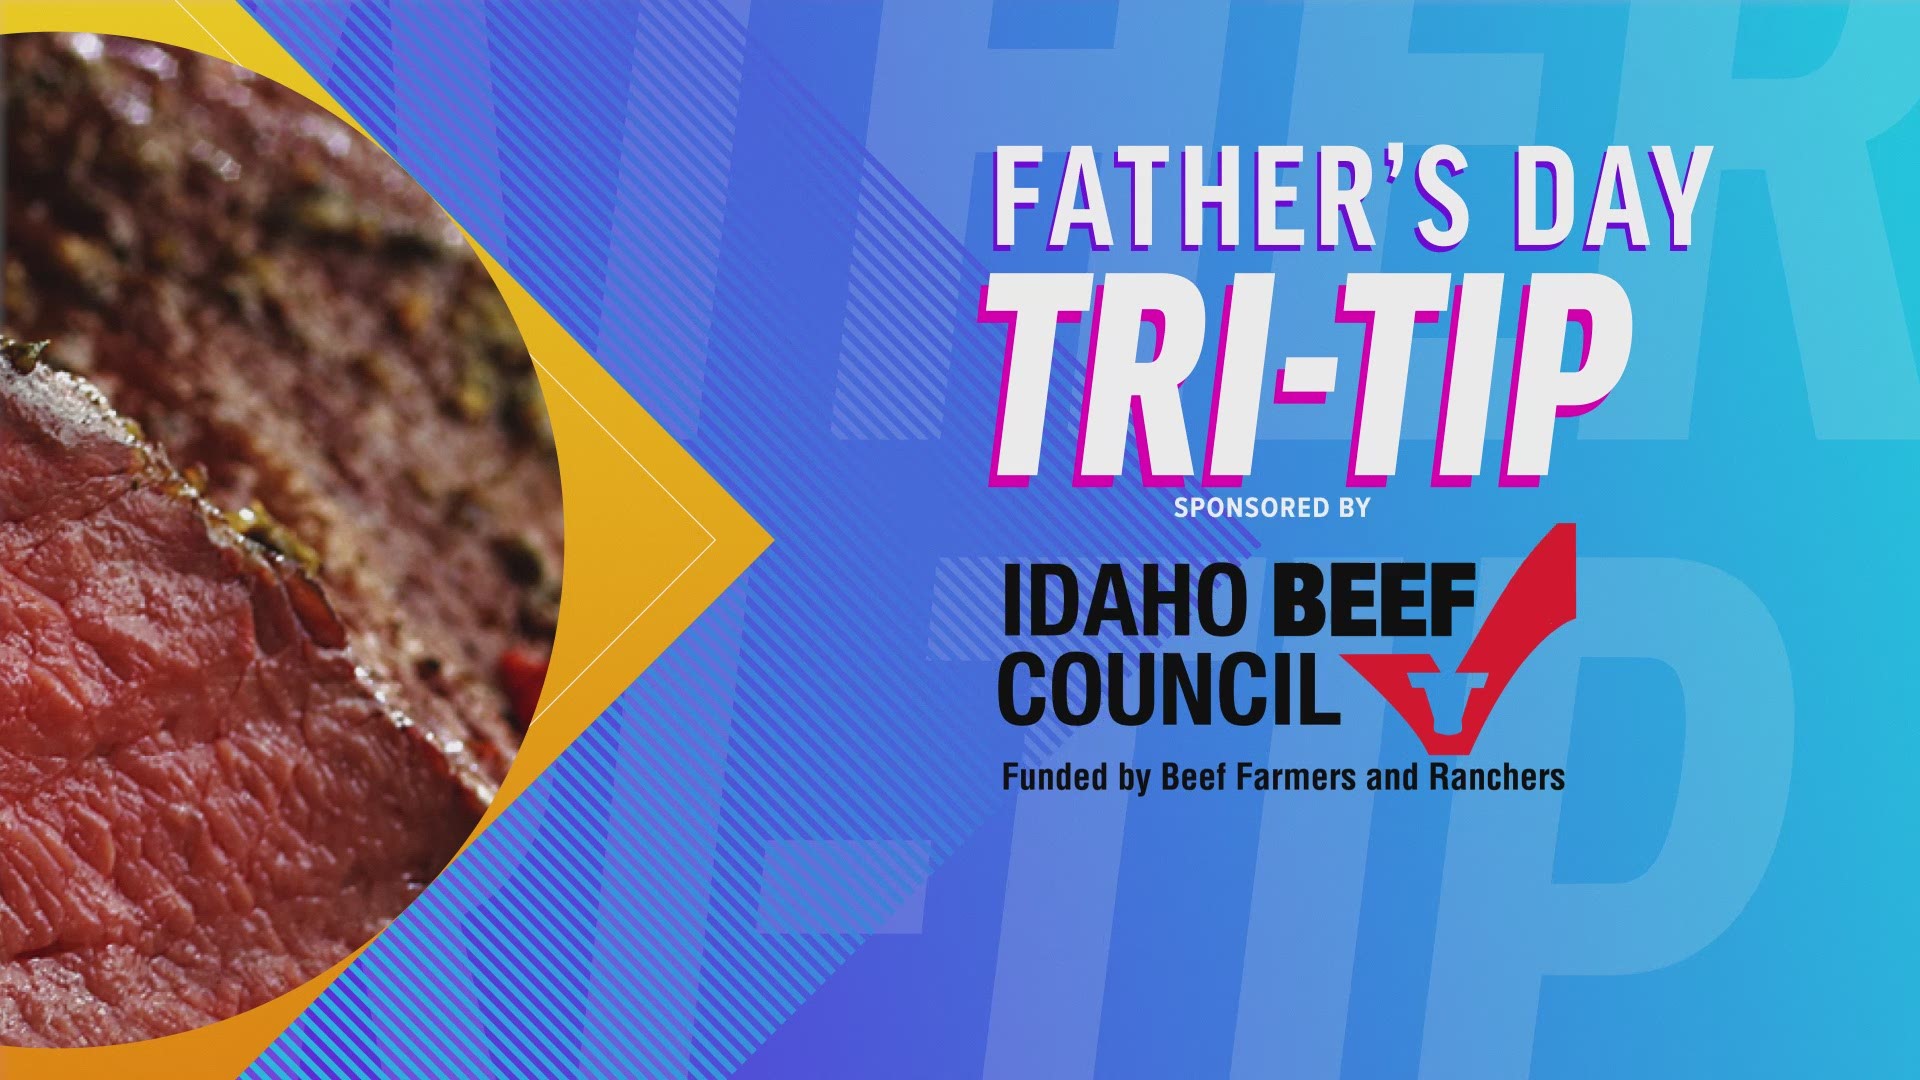 A home cooked meal can really being a family together, especially on Father's Day. 4th Generation Cattlemen, Drew & Gina share with us a Tri-Tip recipe. idbeef.org